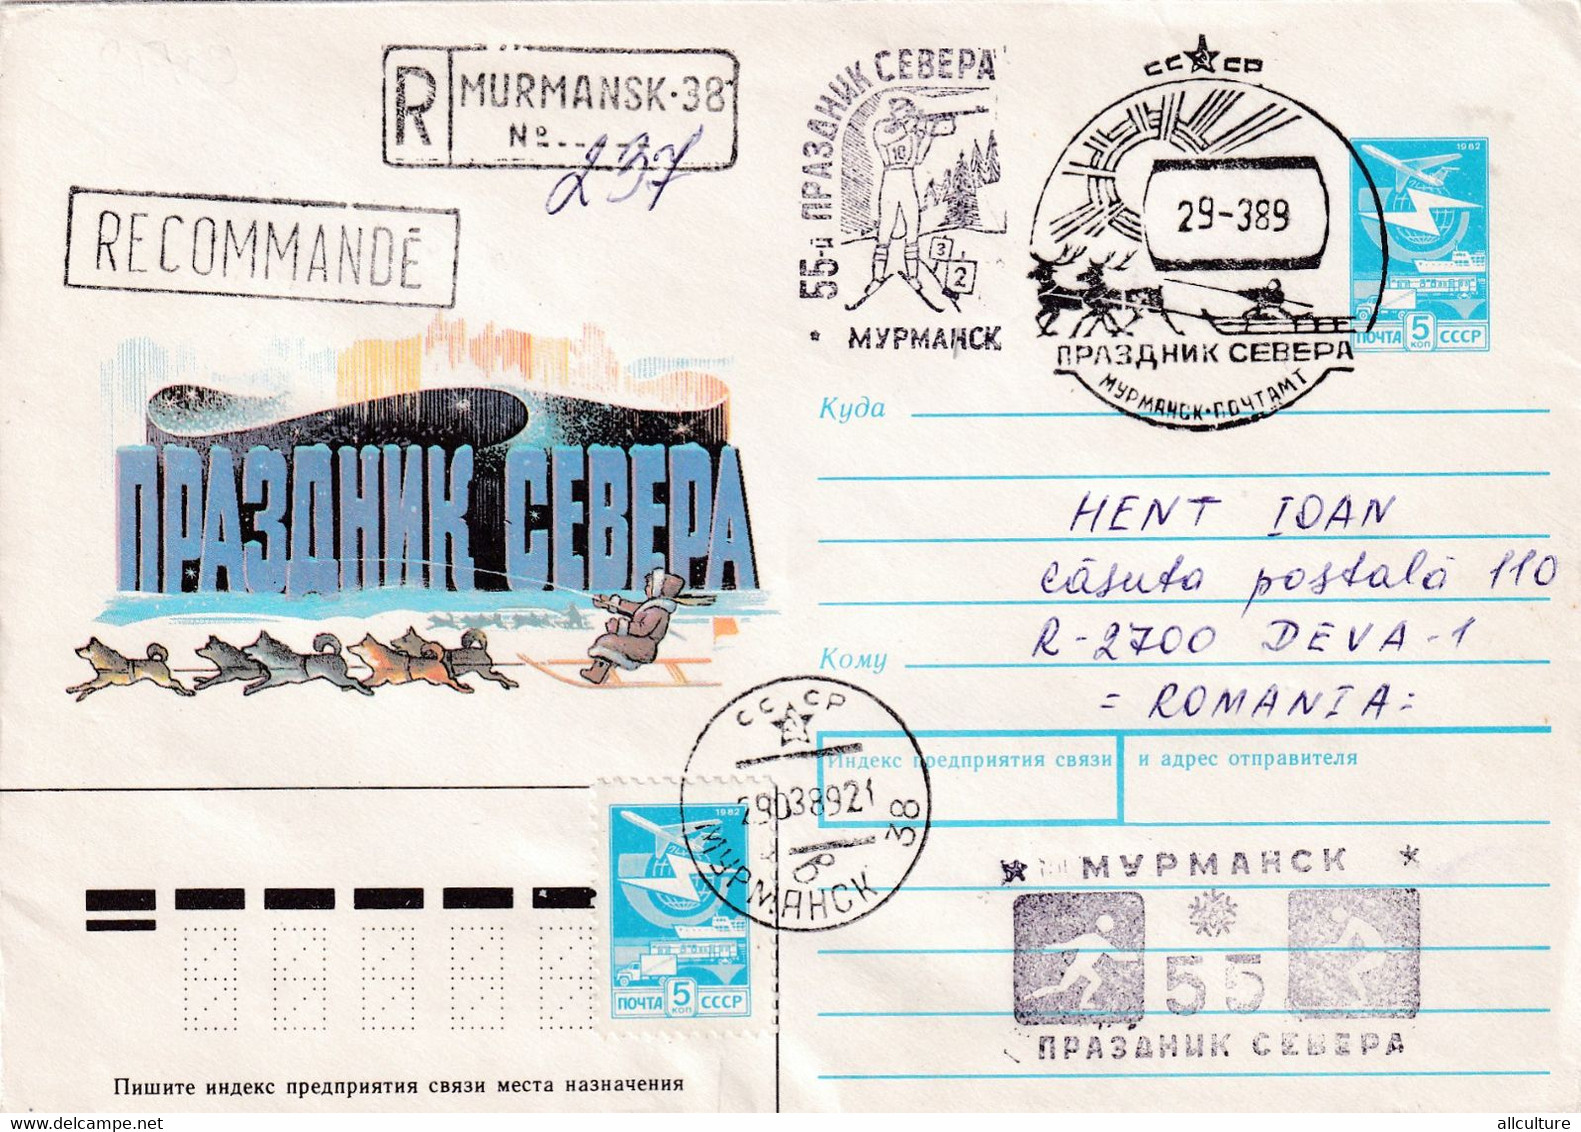 A8152- REGISTRED LETTER MURMANSK, HOLIDAY OF THE NORTH, 1989 USSR POSTAL STATIONERY SENT TO DEVA ROMANIA - Events & Commemorations